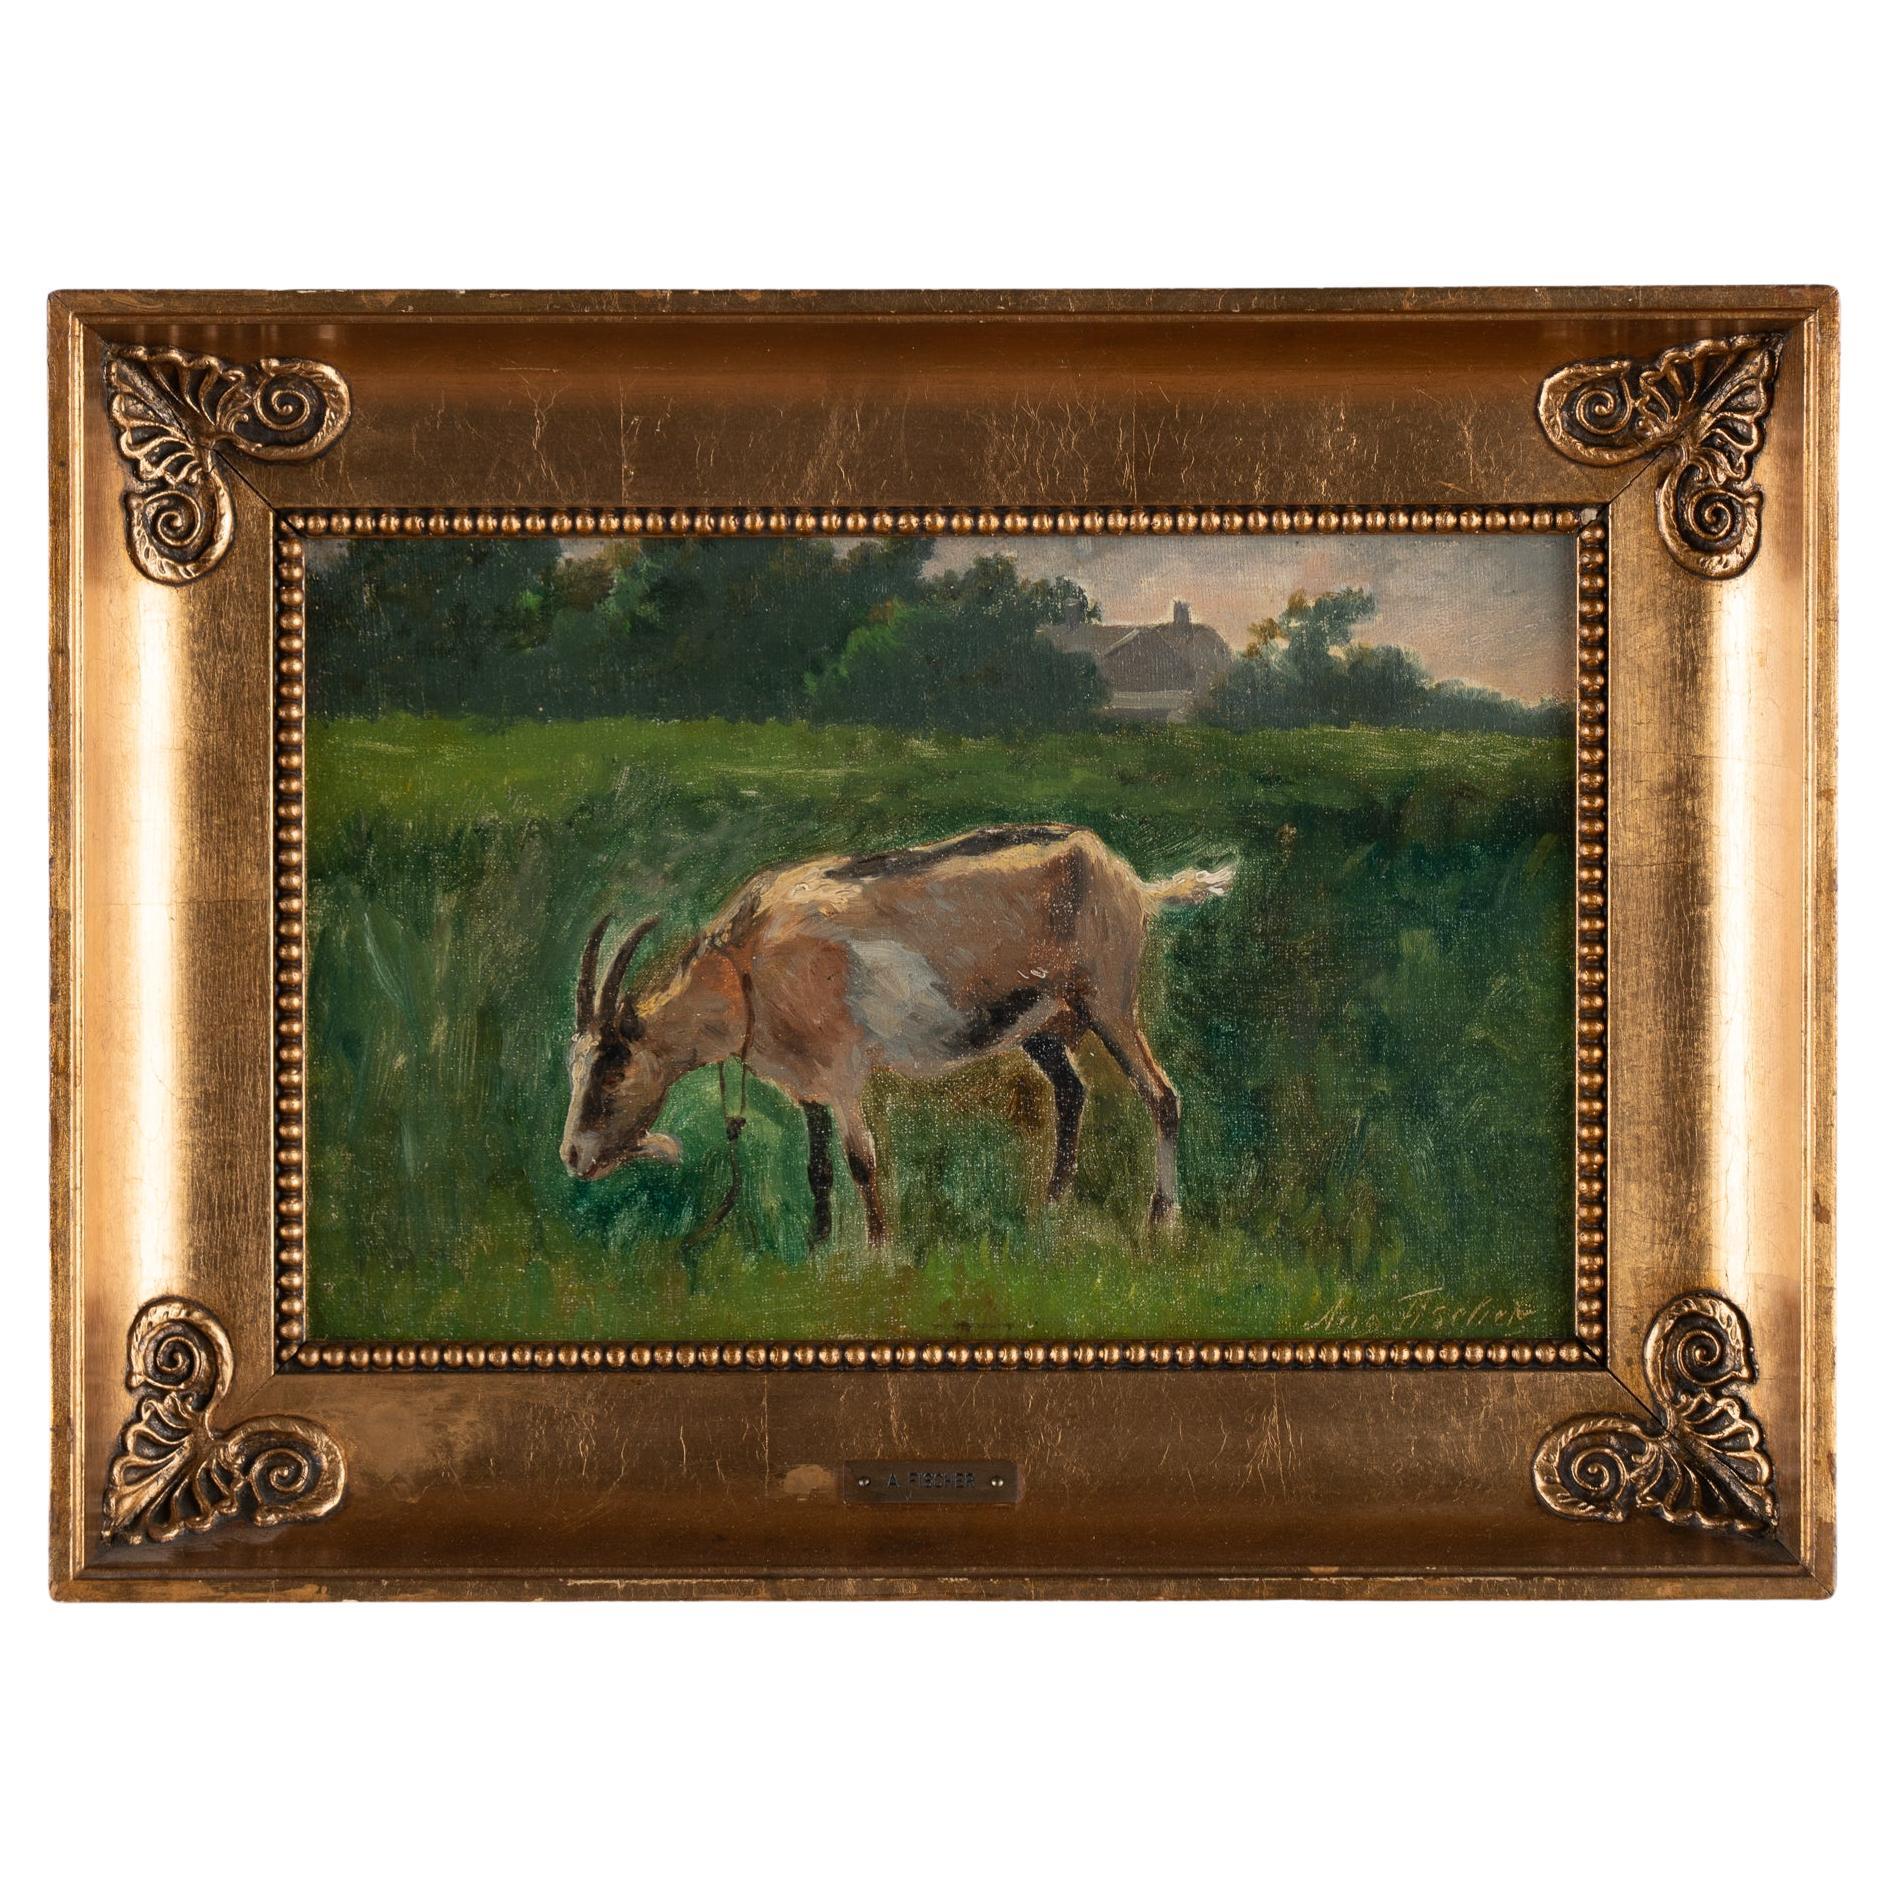 Original Oil on Canvas Painting of Goat Grazing, signed by August Fischer